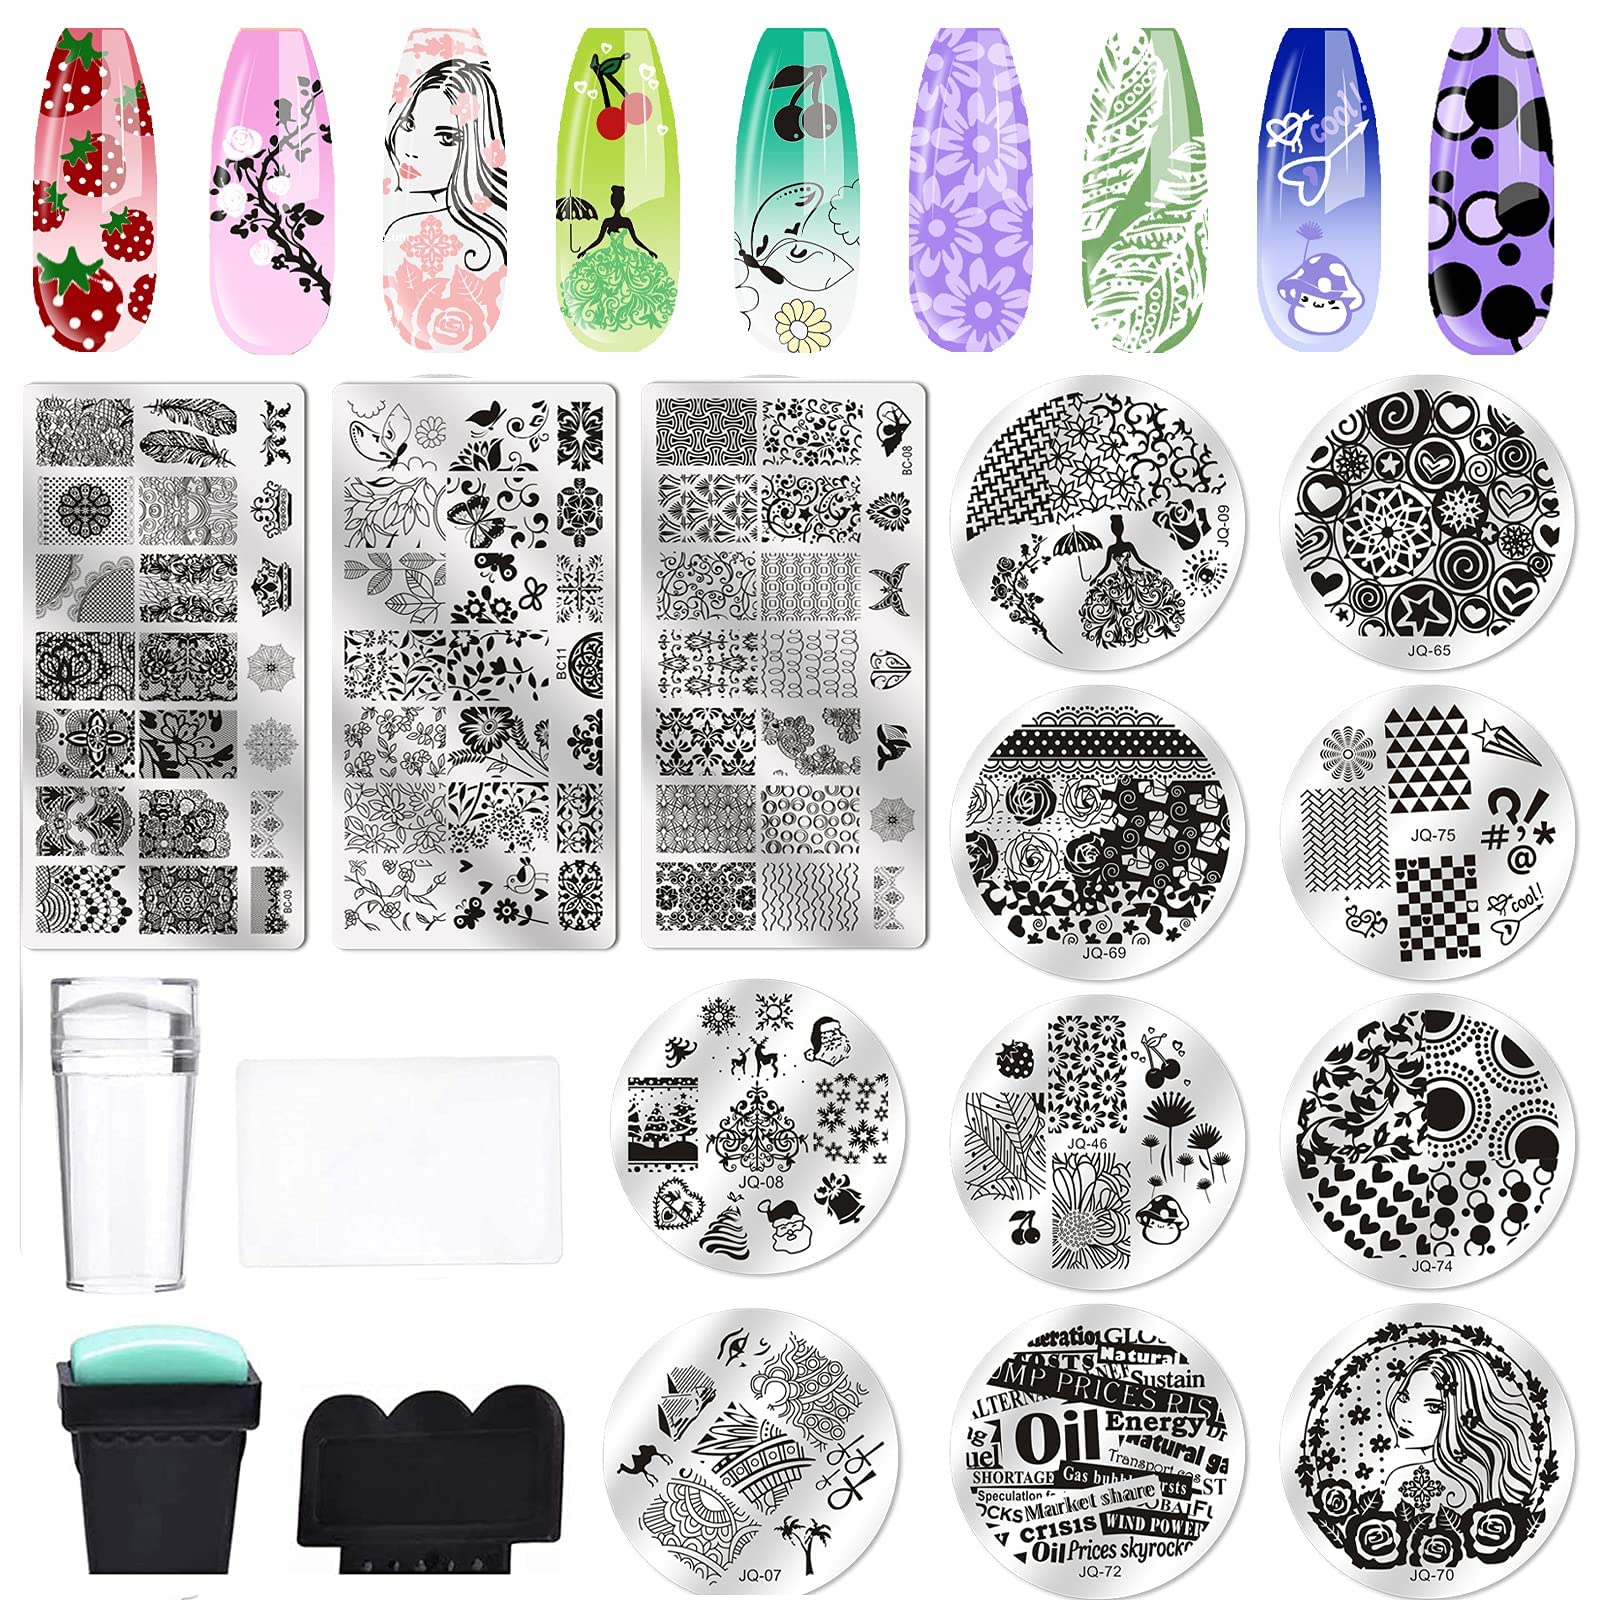 Biutee Nail Stamping Plates set 10 pcs Nail Art Stamper Scraper Gift Box  Nail Stamp Template Kit Lace Flower Butterfly Star Design Nail Image Plate